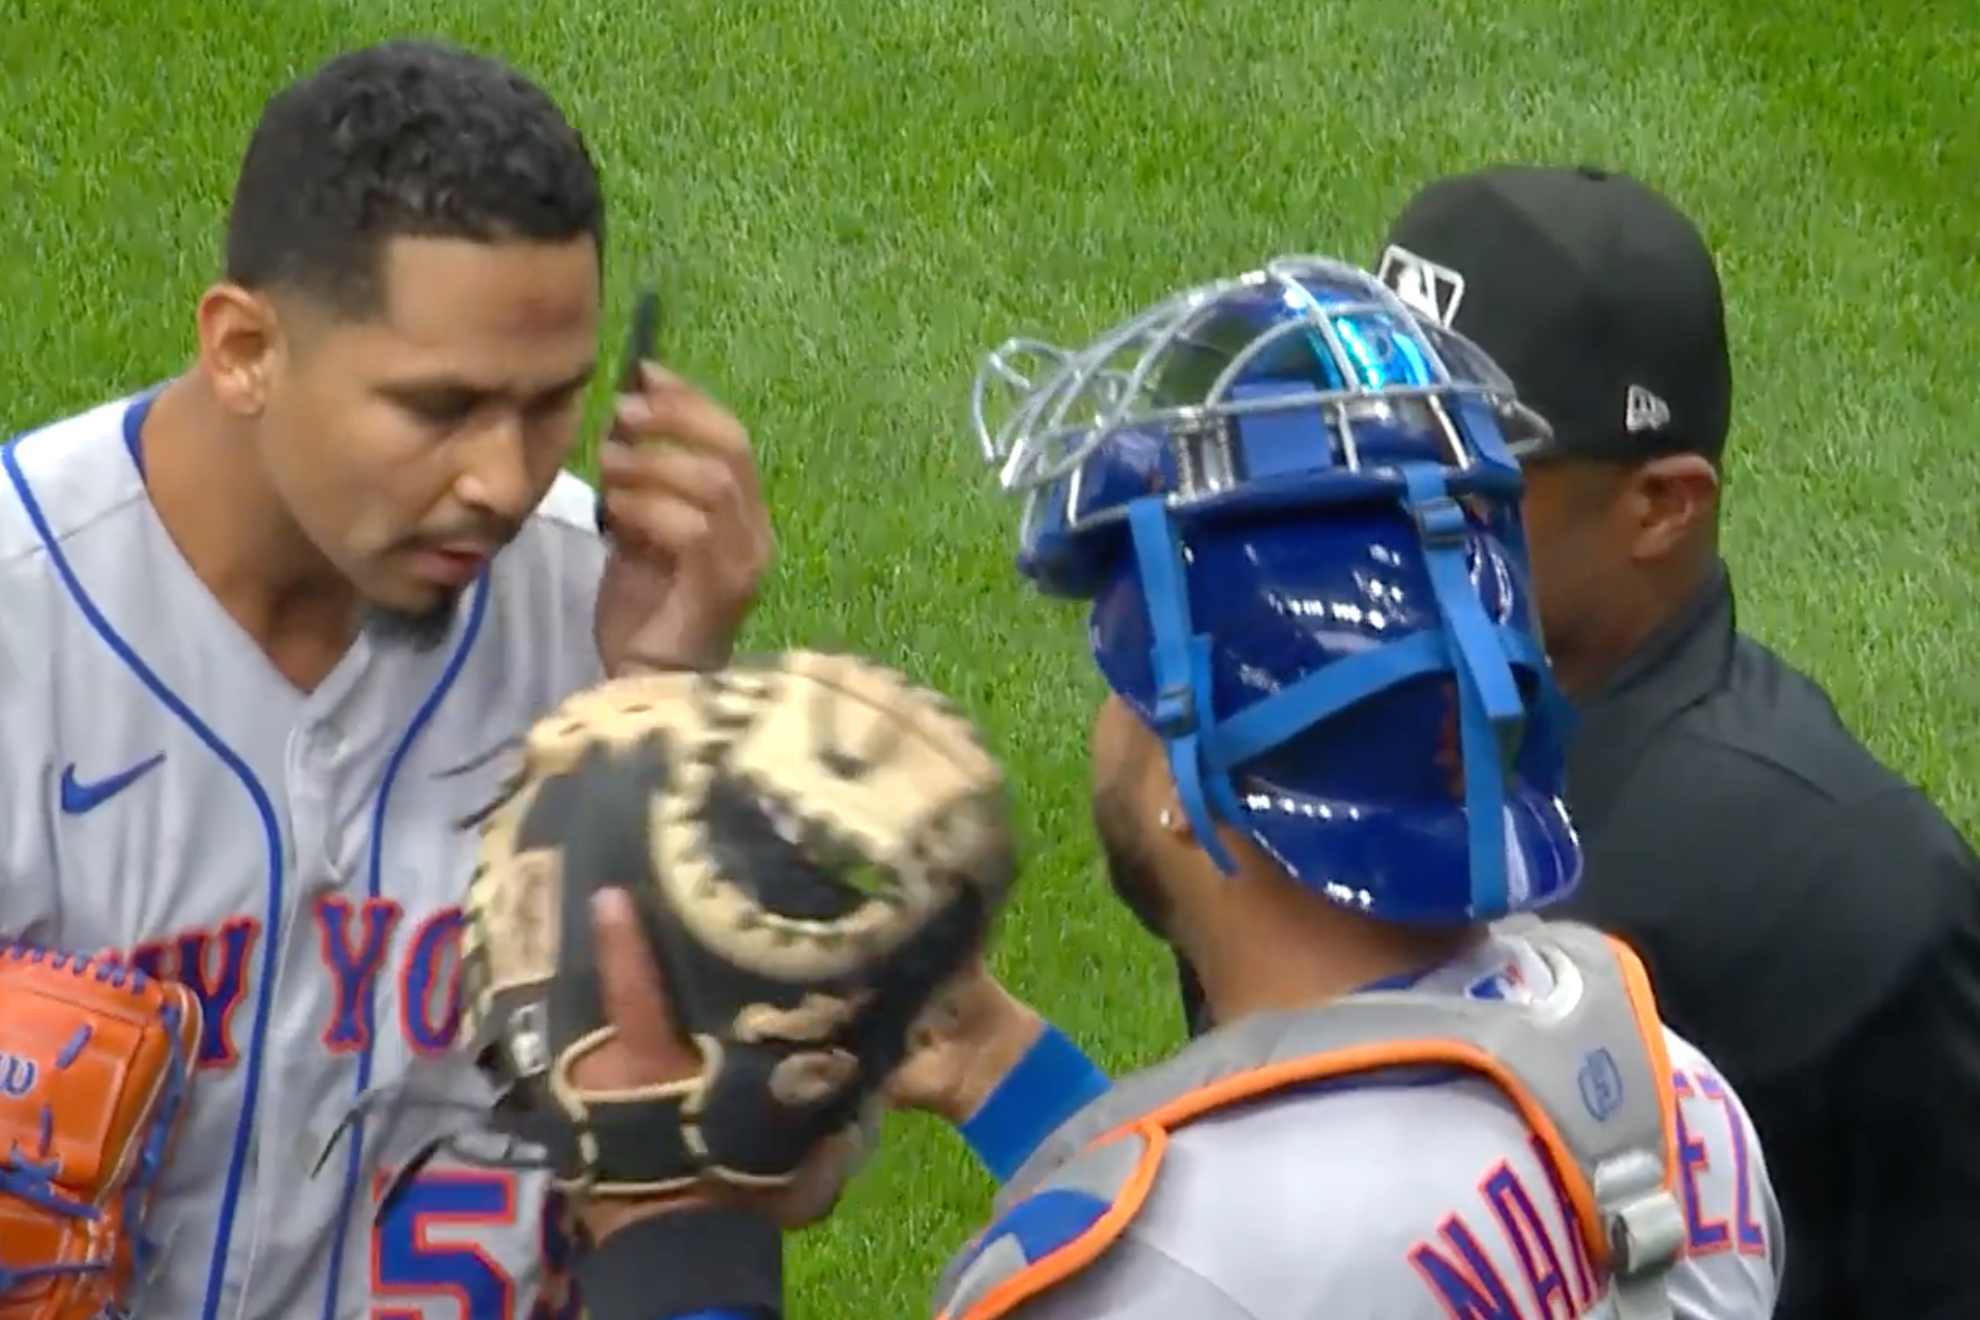 Mets pitcher Carlos Carrasco (left) deals with PitchCom issues next to catcher Omar Narvaez and and MLB umpire.